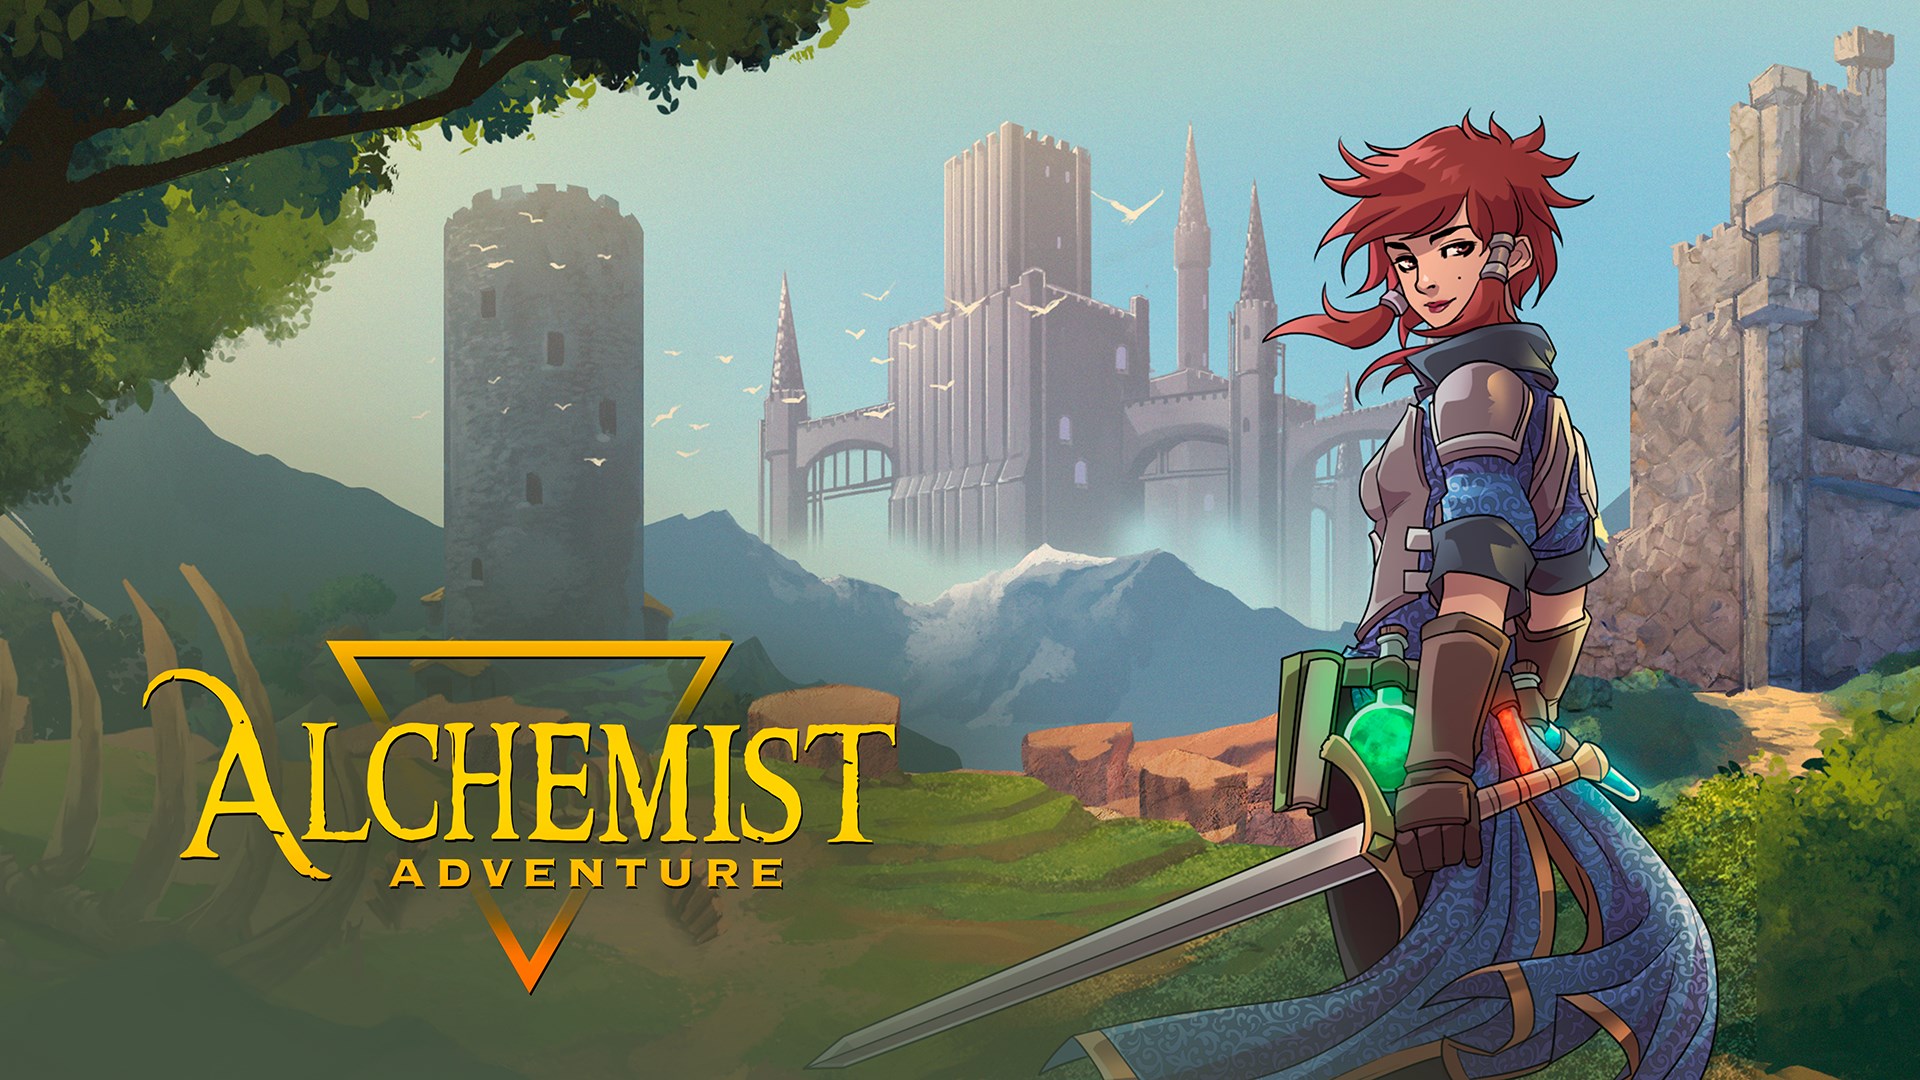 Video For Alchemist Adventure Is Now Available For Xbox One And Xbox Series X|S